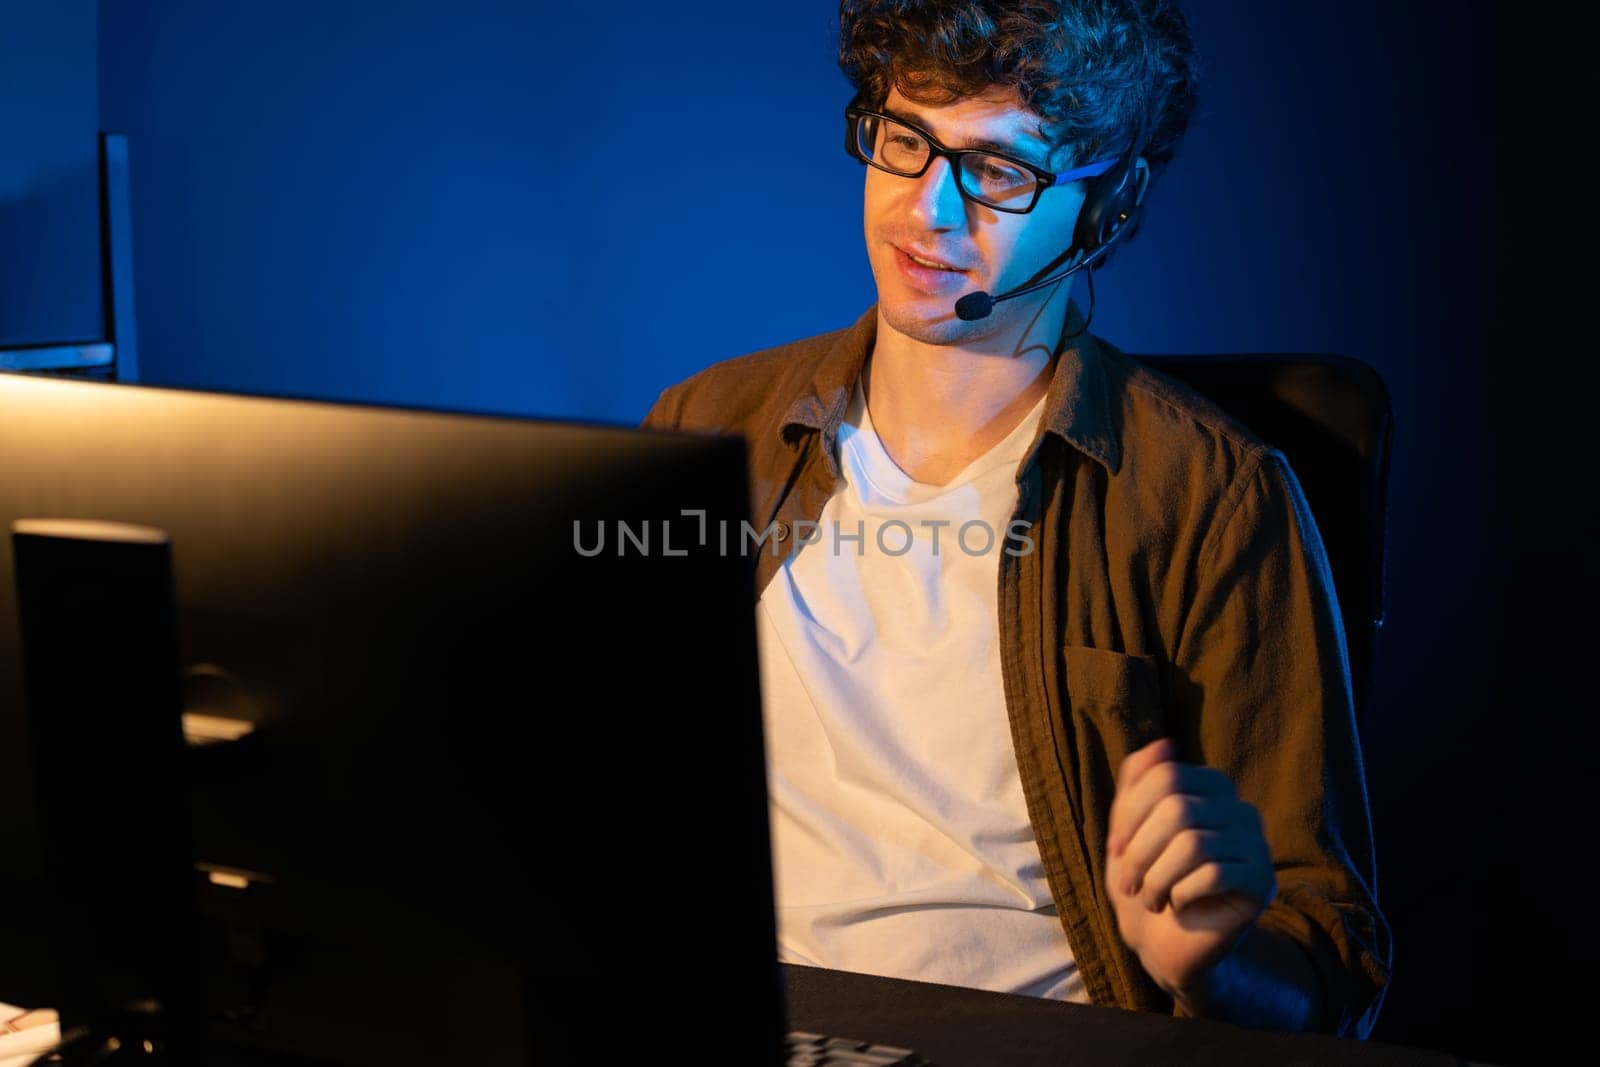 Young creative businessman communicating with listeners on laptop screen or meeting with team member, wearing headphones at neon light modern home office. Concept of working at night time. Gusher.